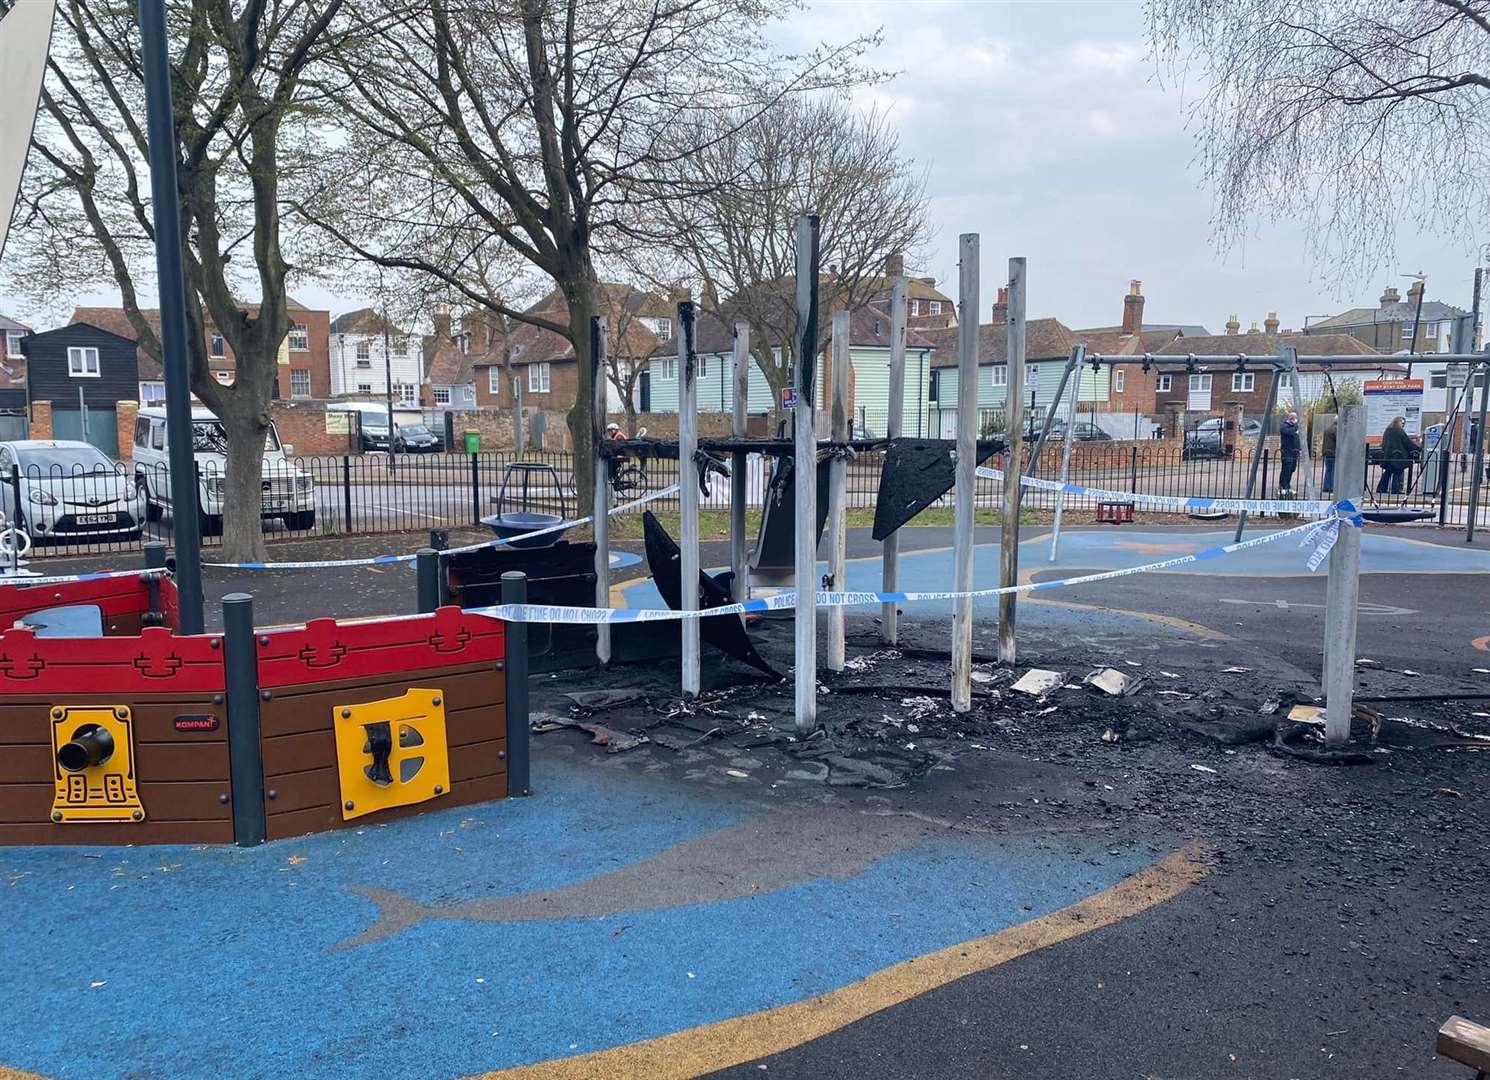 A piece of play equipment was razed to the ground in the early hours. Picture: Faversham Pools